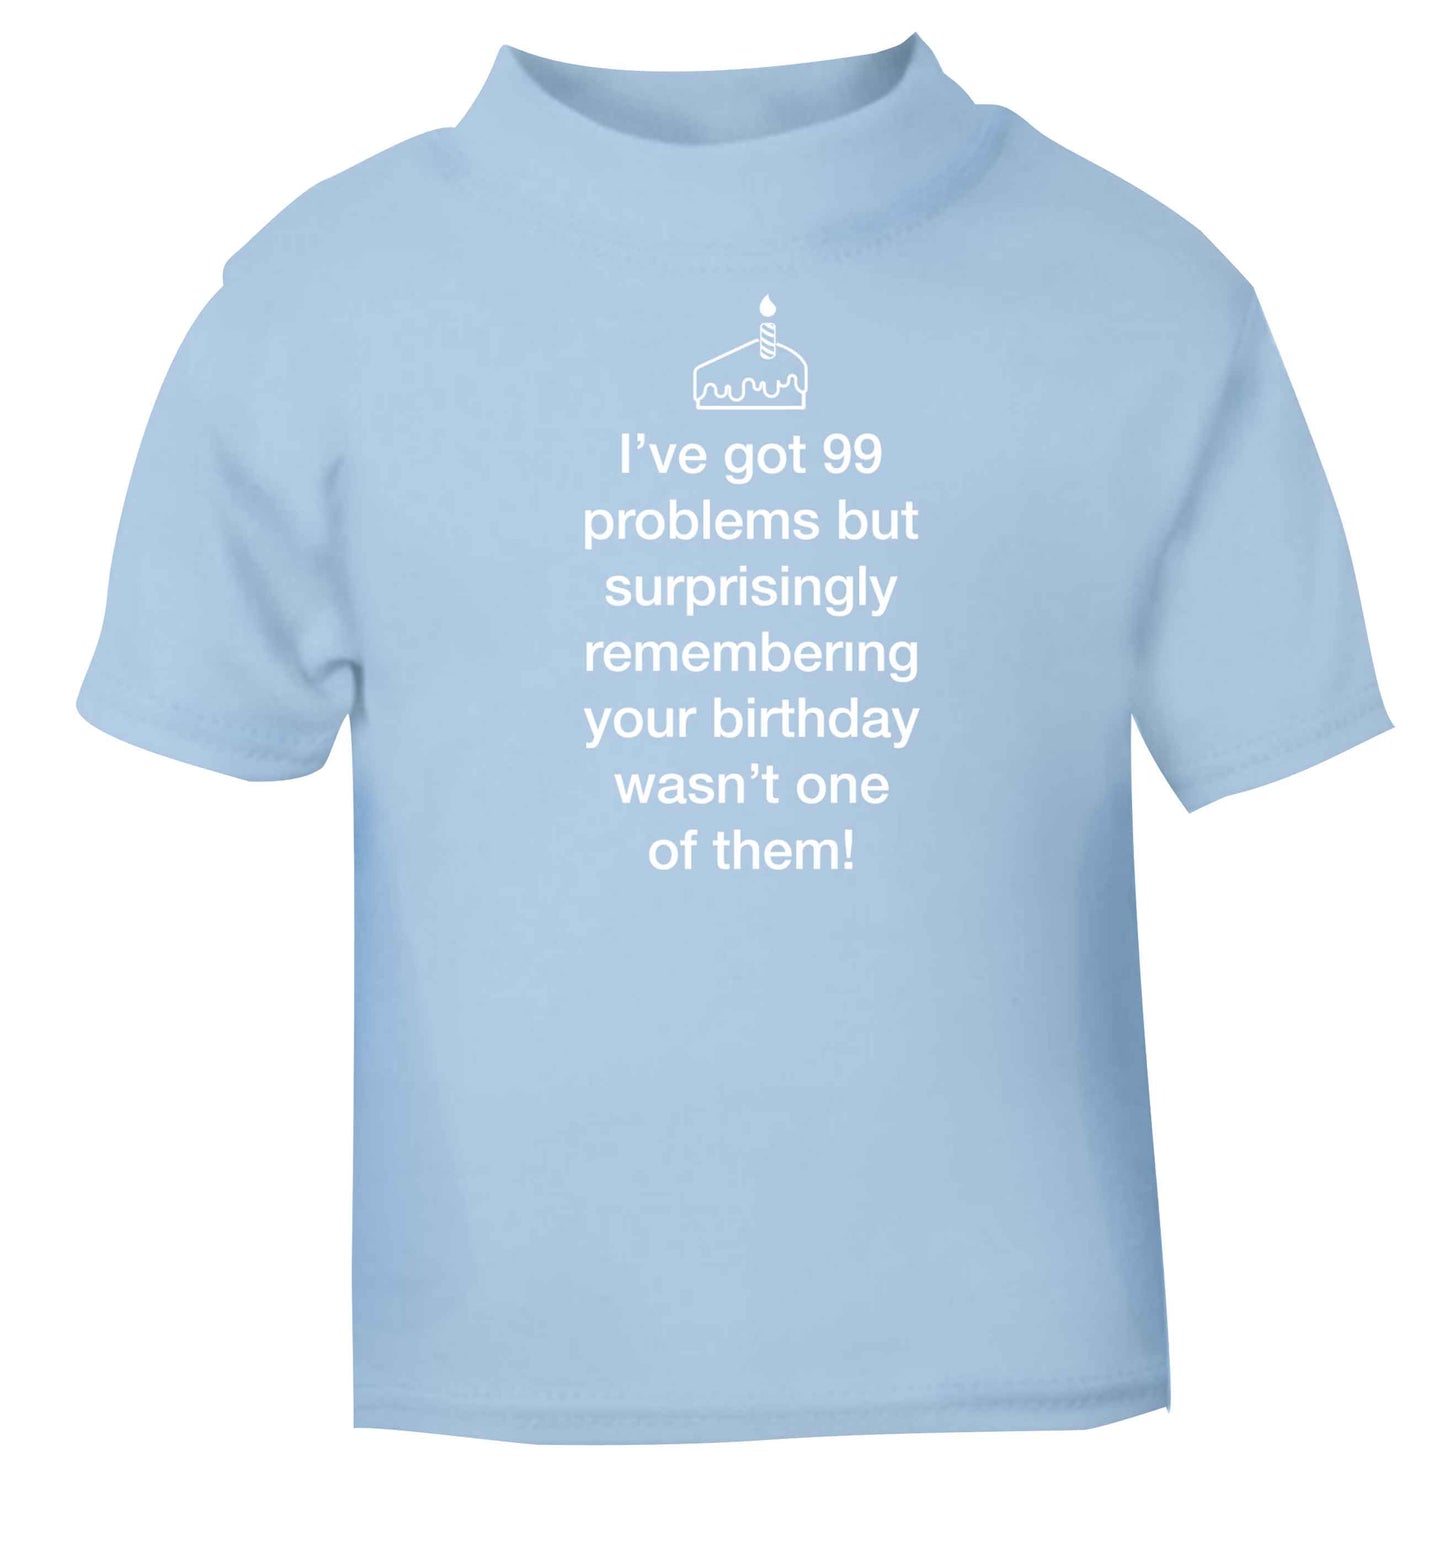 I've got 99 problems but surprisingly remembering your birthday wasn't one of them! light blue baby toddler Tshirt 2 Years